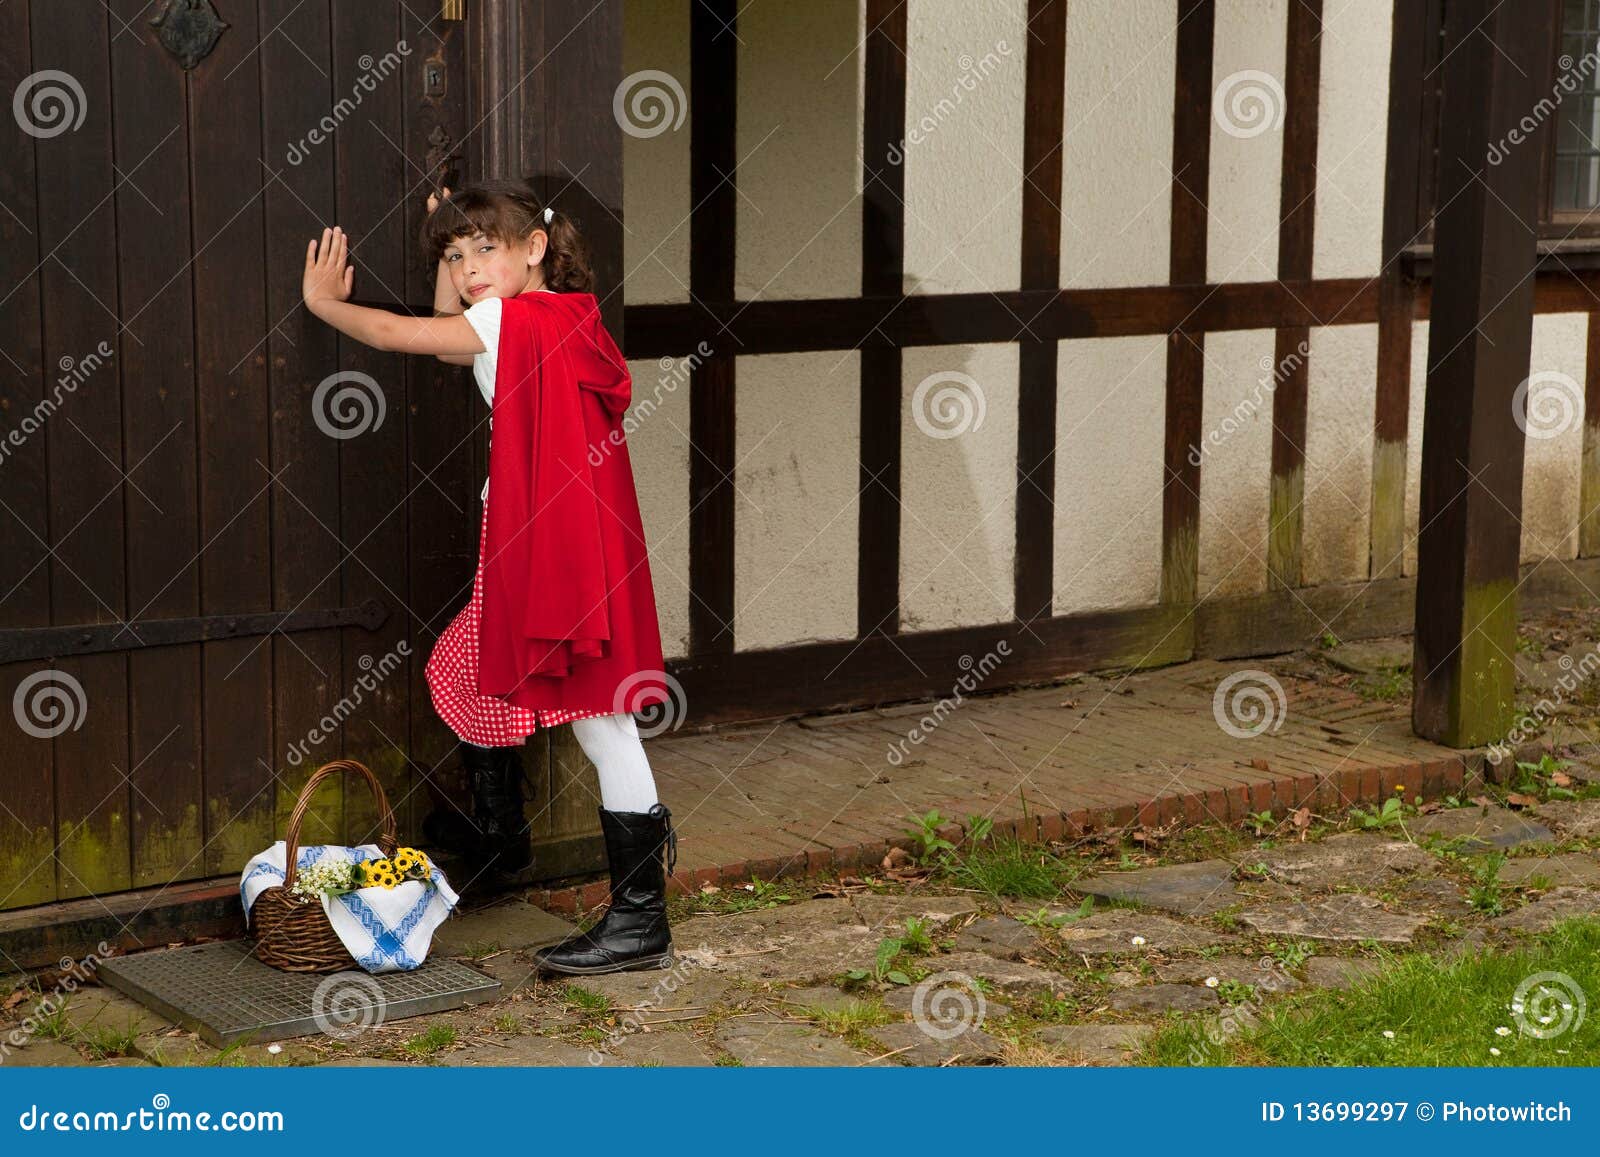 Little Red Riding Hood At Grandma S House Stock Image Image Of Basket Clothes